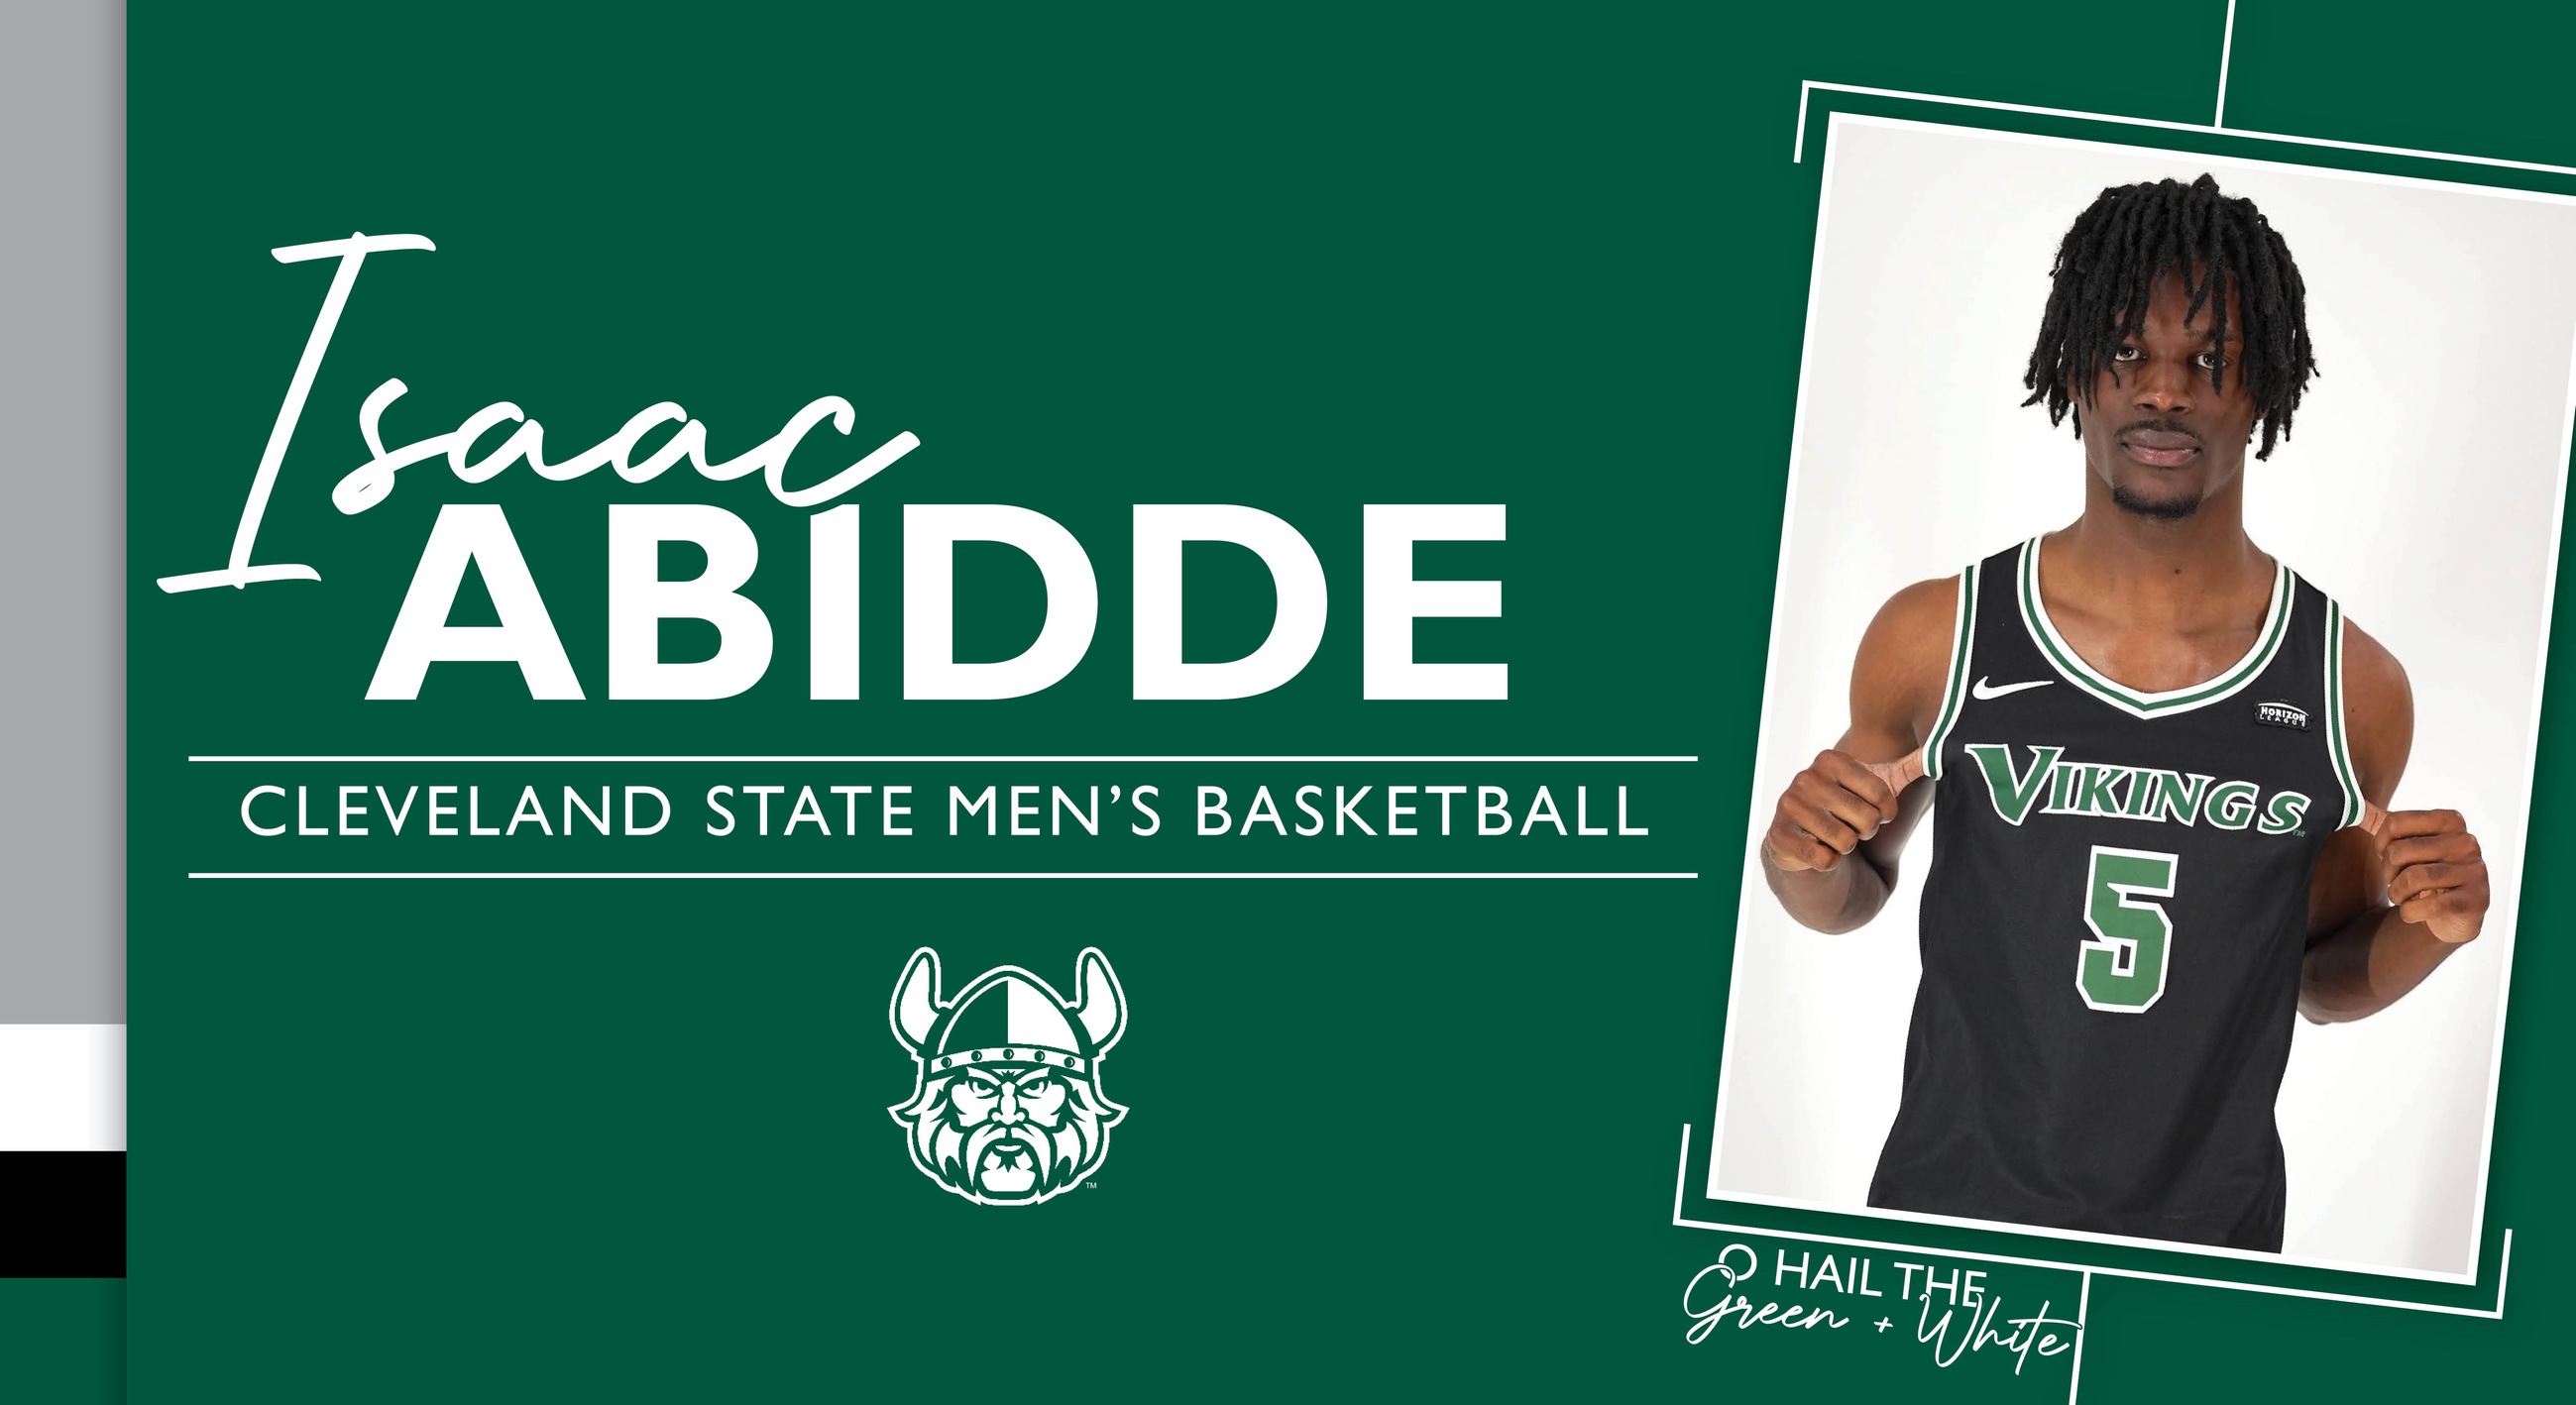 Cleveland State Men’s Basketball Signs Isaac Abidde to Letter of Intent